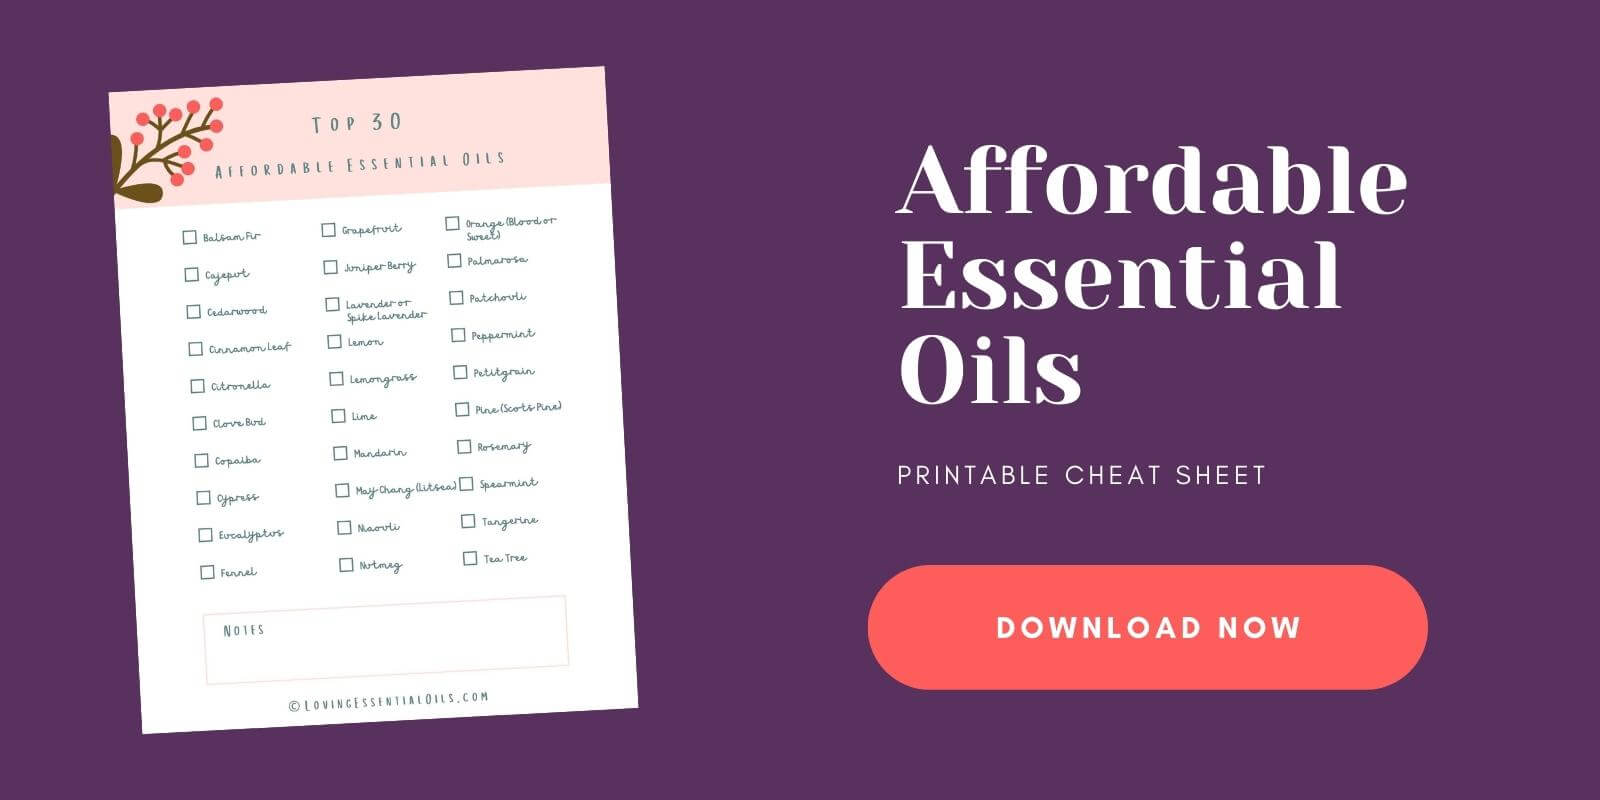 Affordable Essential Oils Printable Guide by Loving Essential Oils